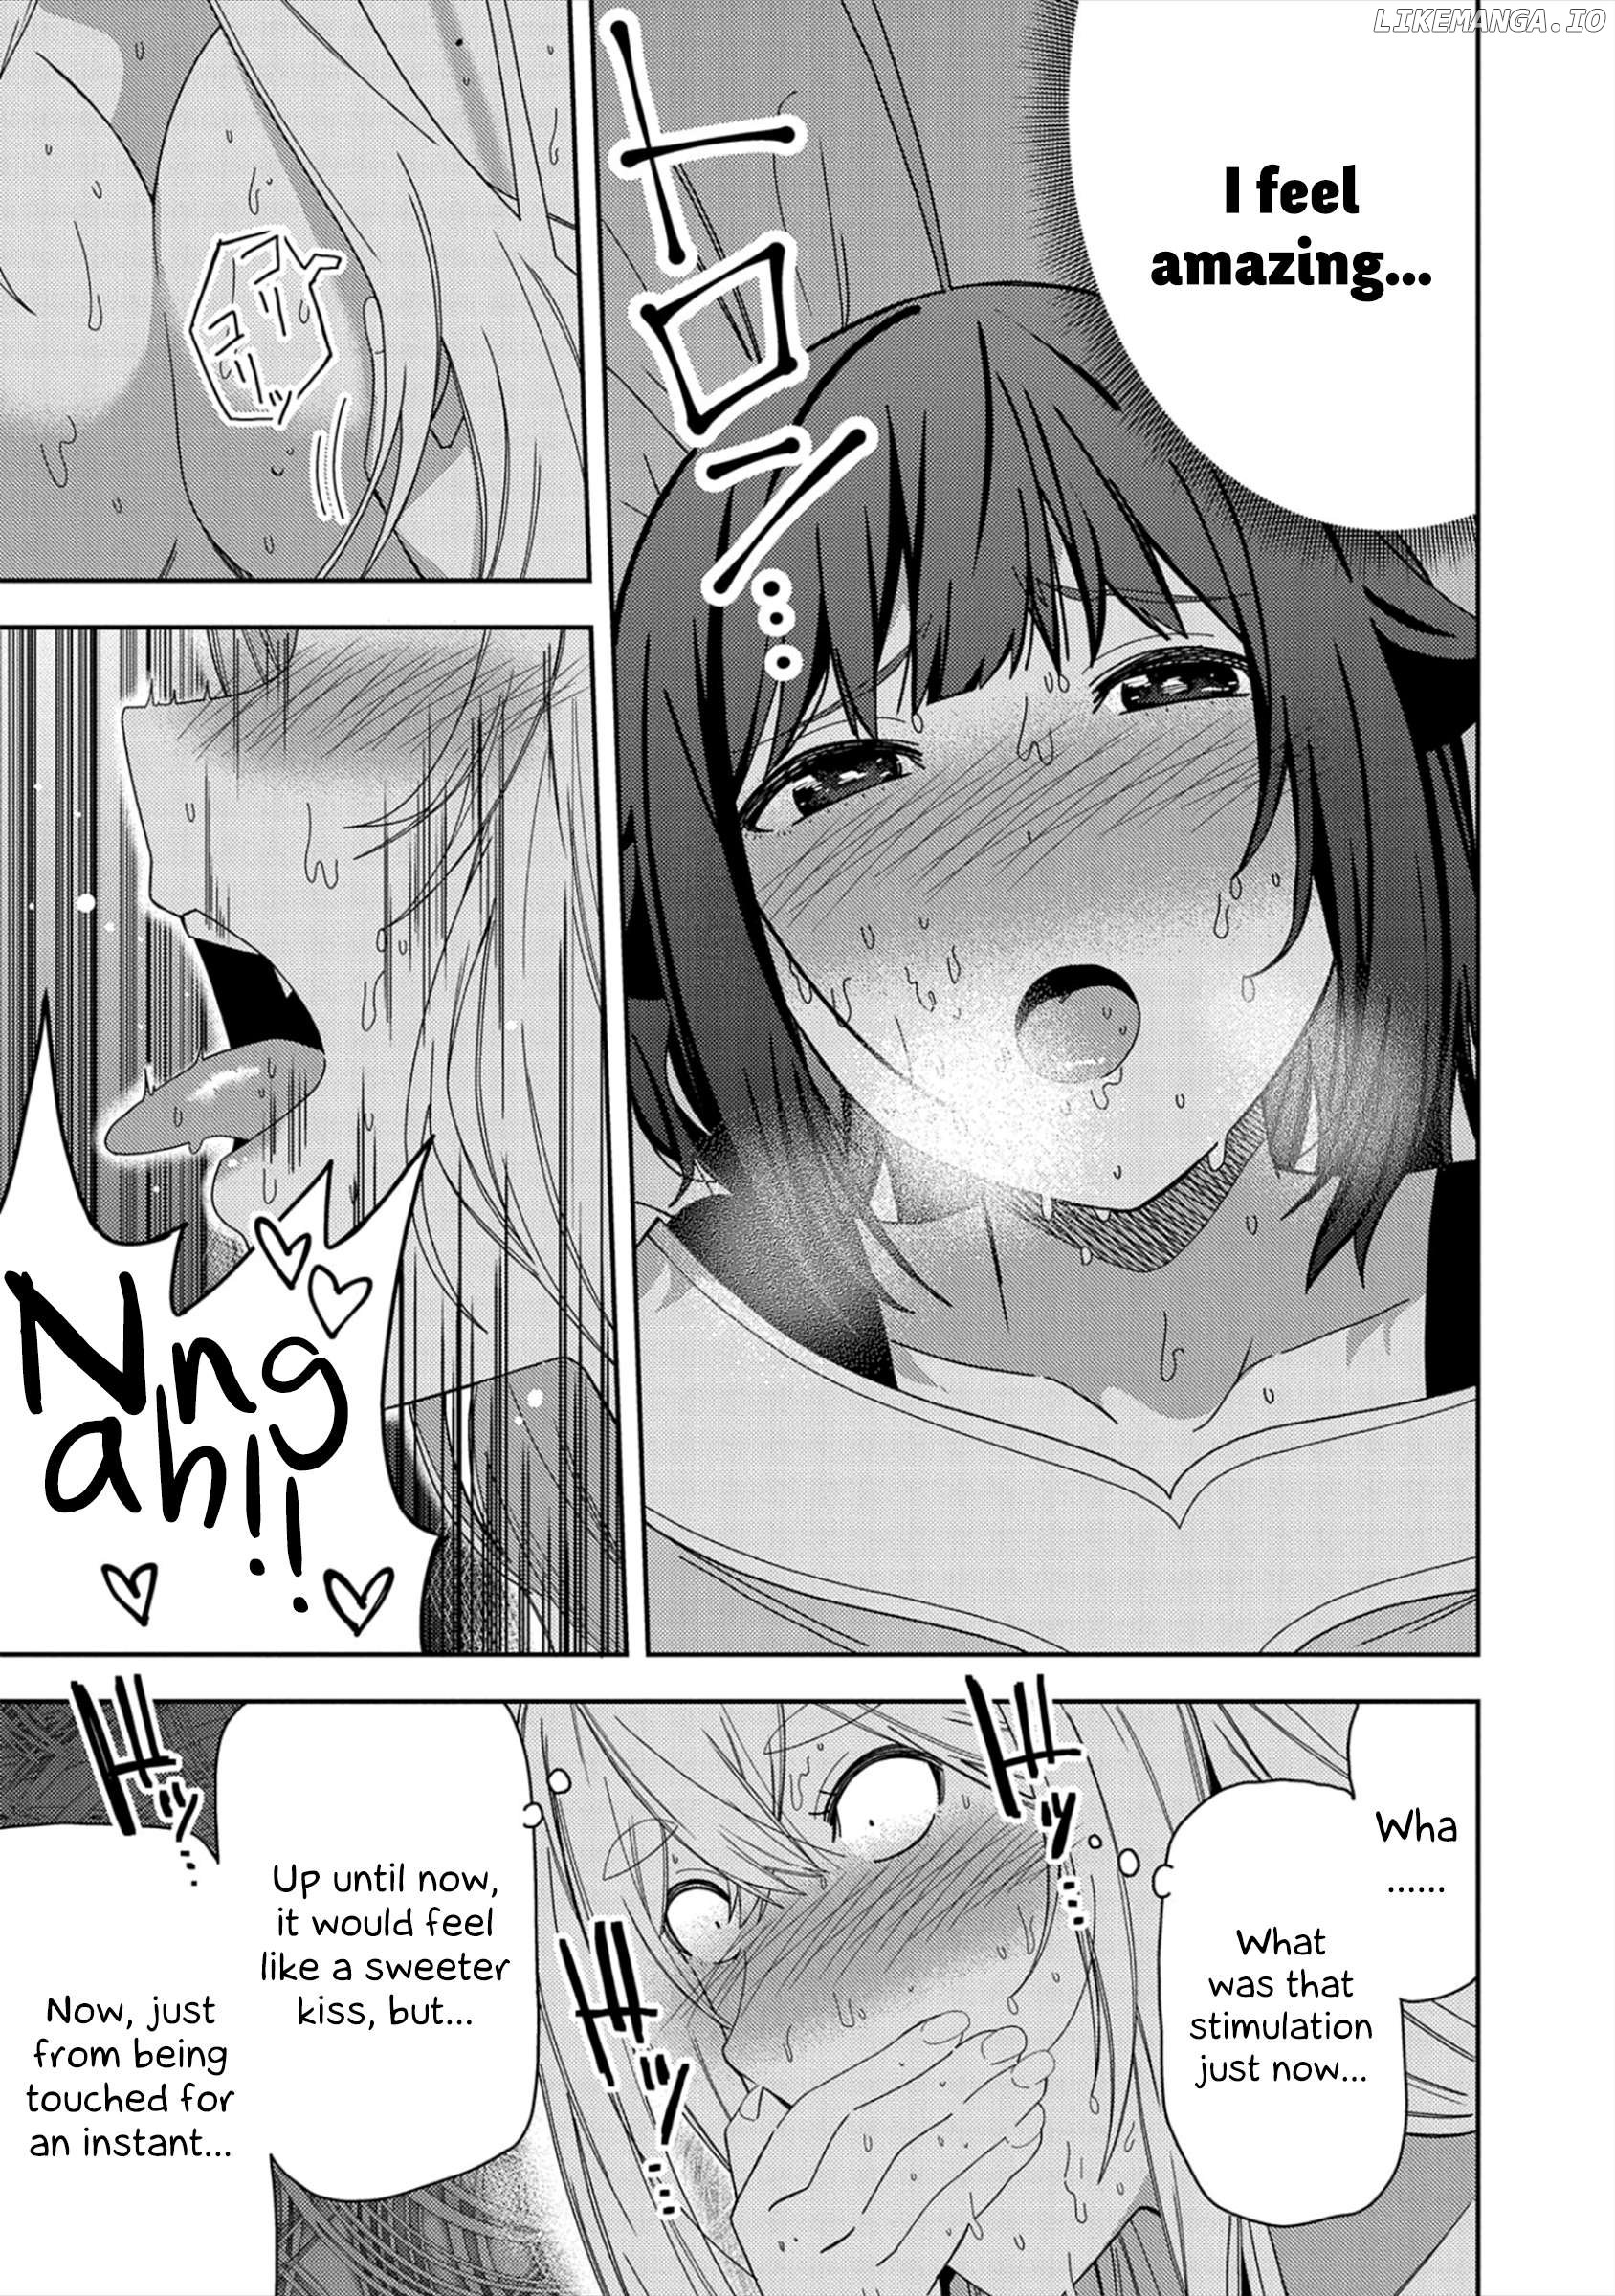 I Summoned The Devil To Grant Me a Wish, But I Married Her Instead Since She Was Adorable ~My New Devil Wife~ Chapter 31 - page 13